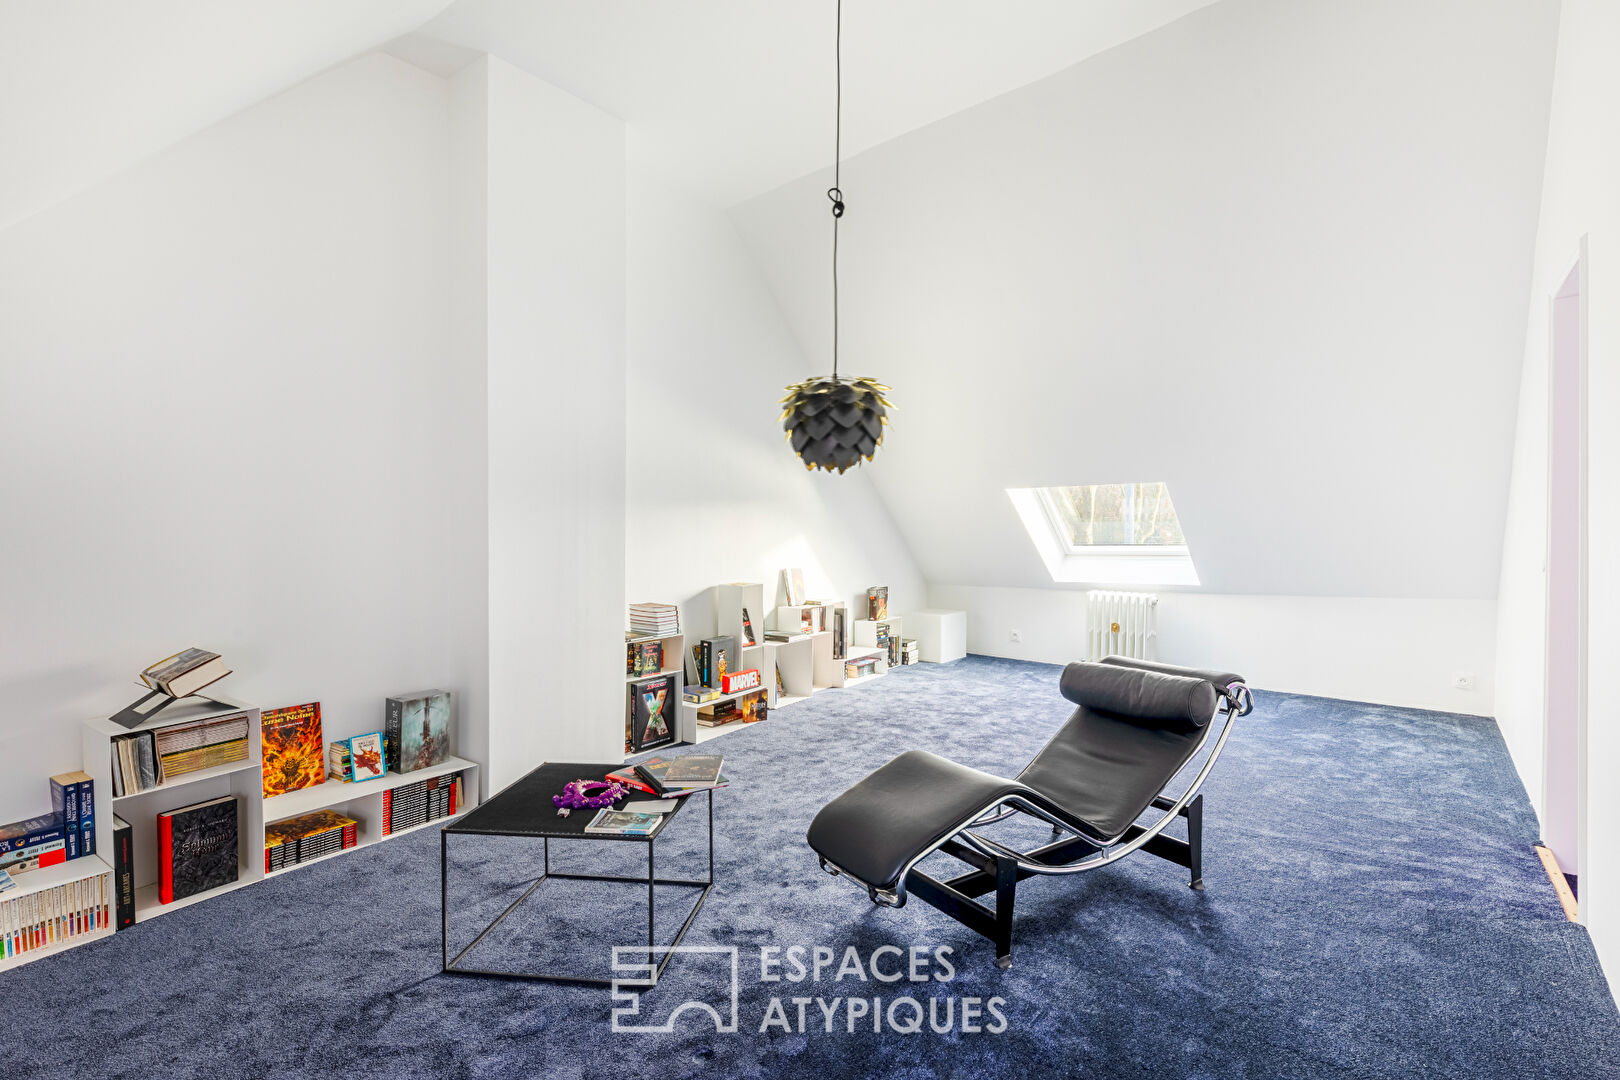 Renovated house with private cinema room, on the banks of the Seine